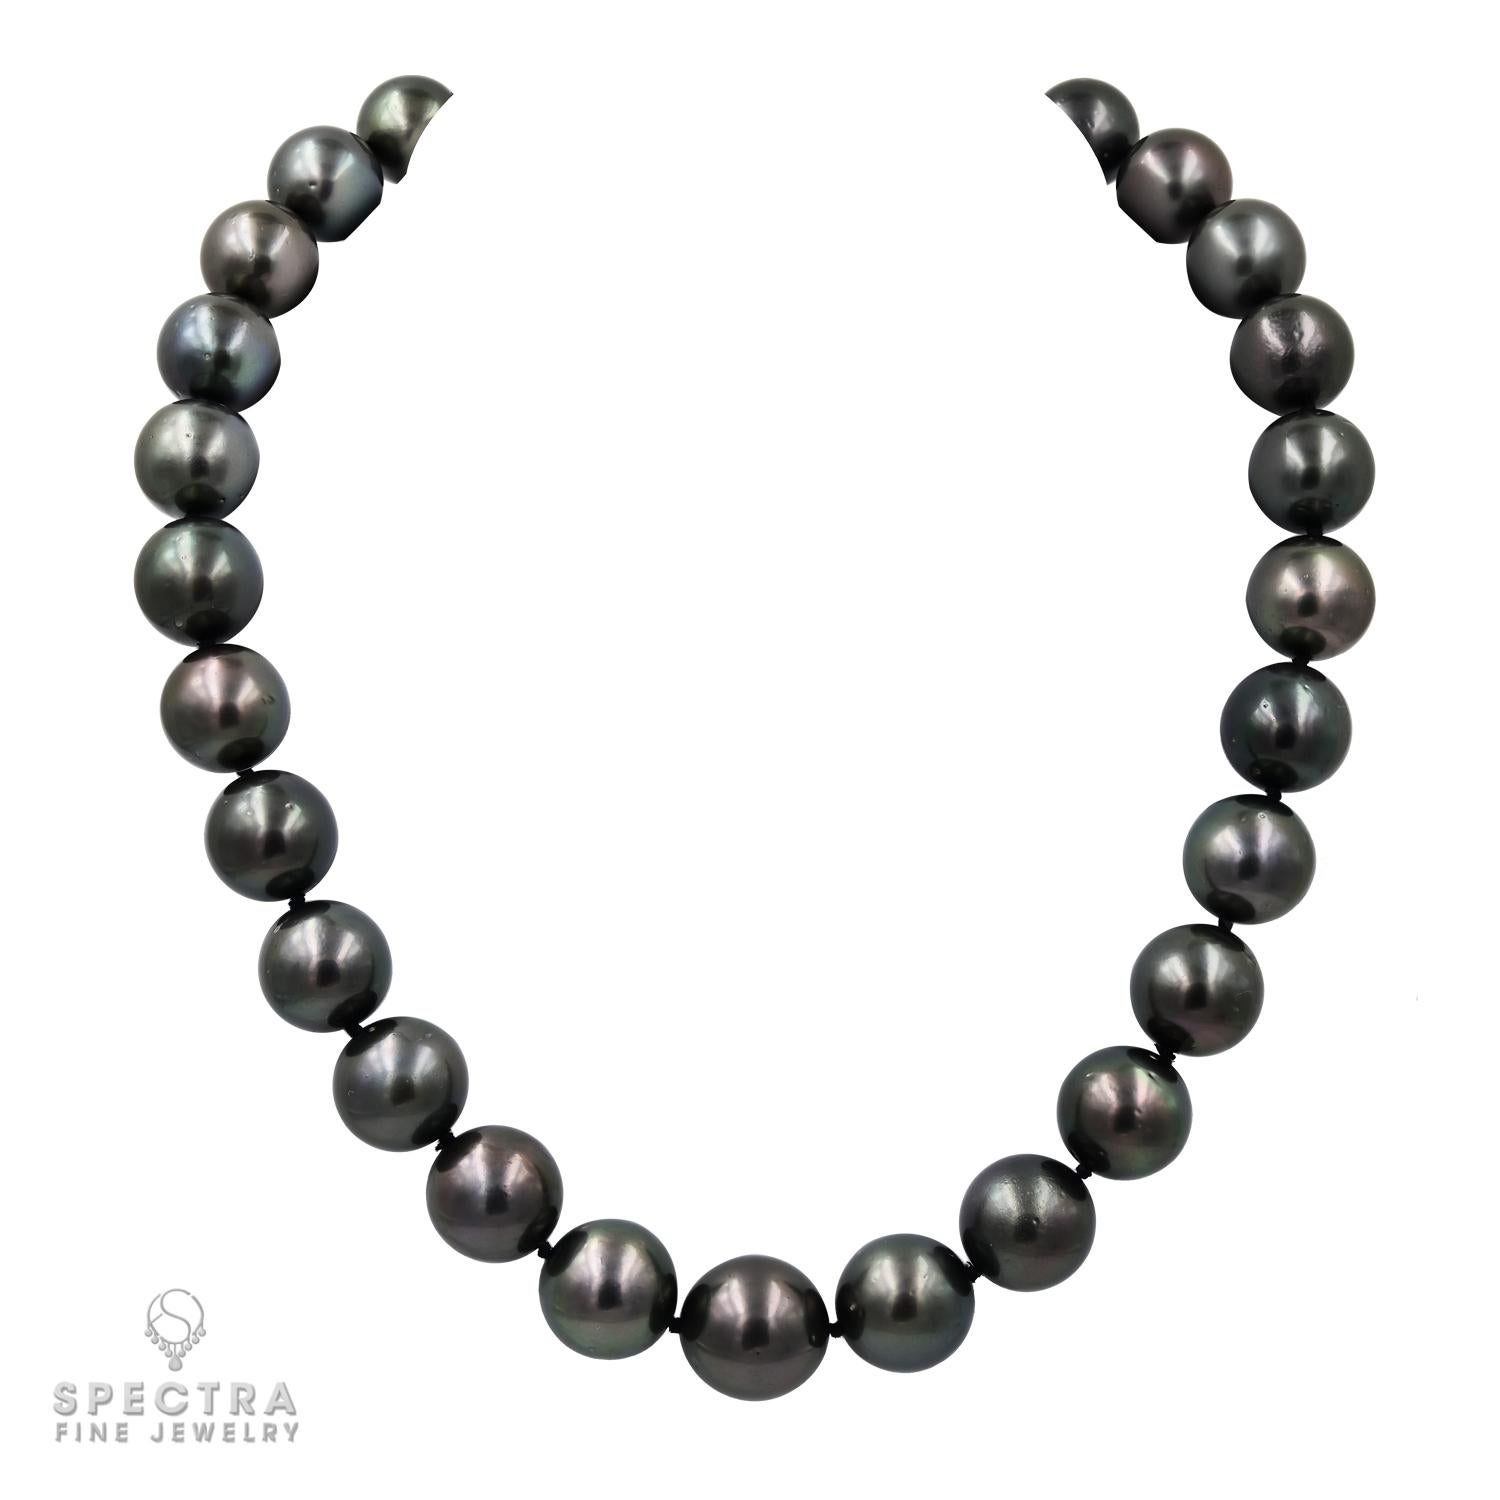 Elevate your style with this exquisite single strand South Sea black pearl necklace, adorned with a captivating green overtone. Crafted from 29 natural South Sea cultured pearls, each pearl boasts a diameter ranging from 15 to 17.65mm, ensuring a